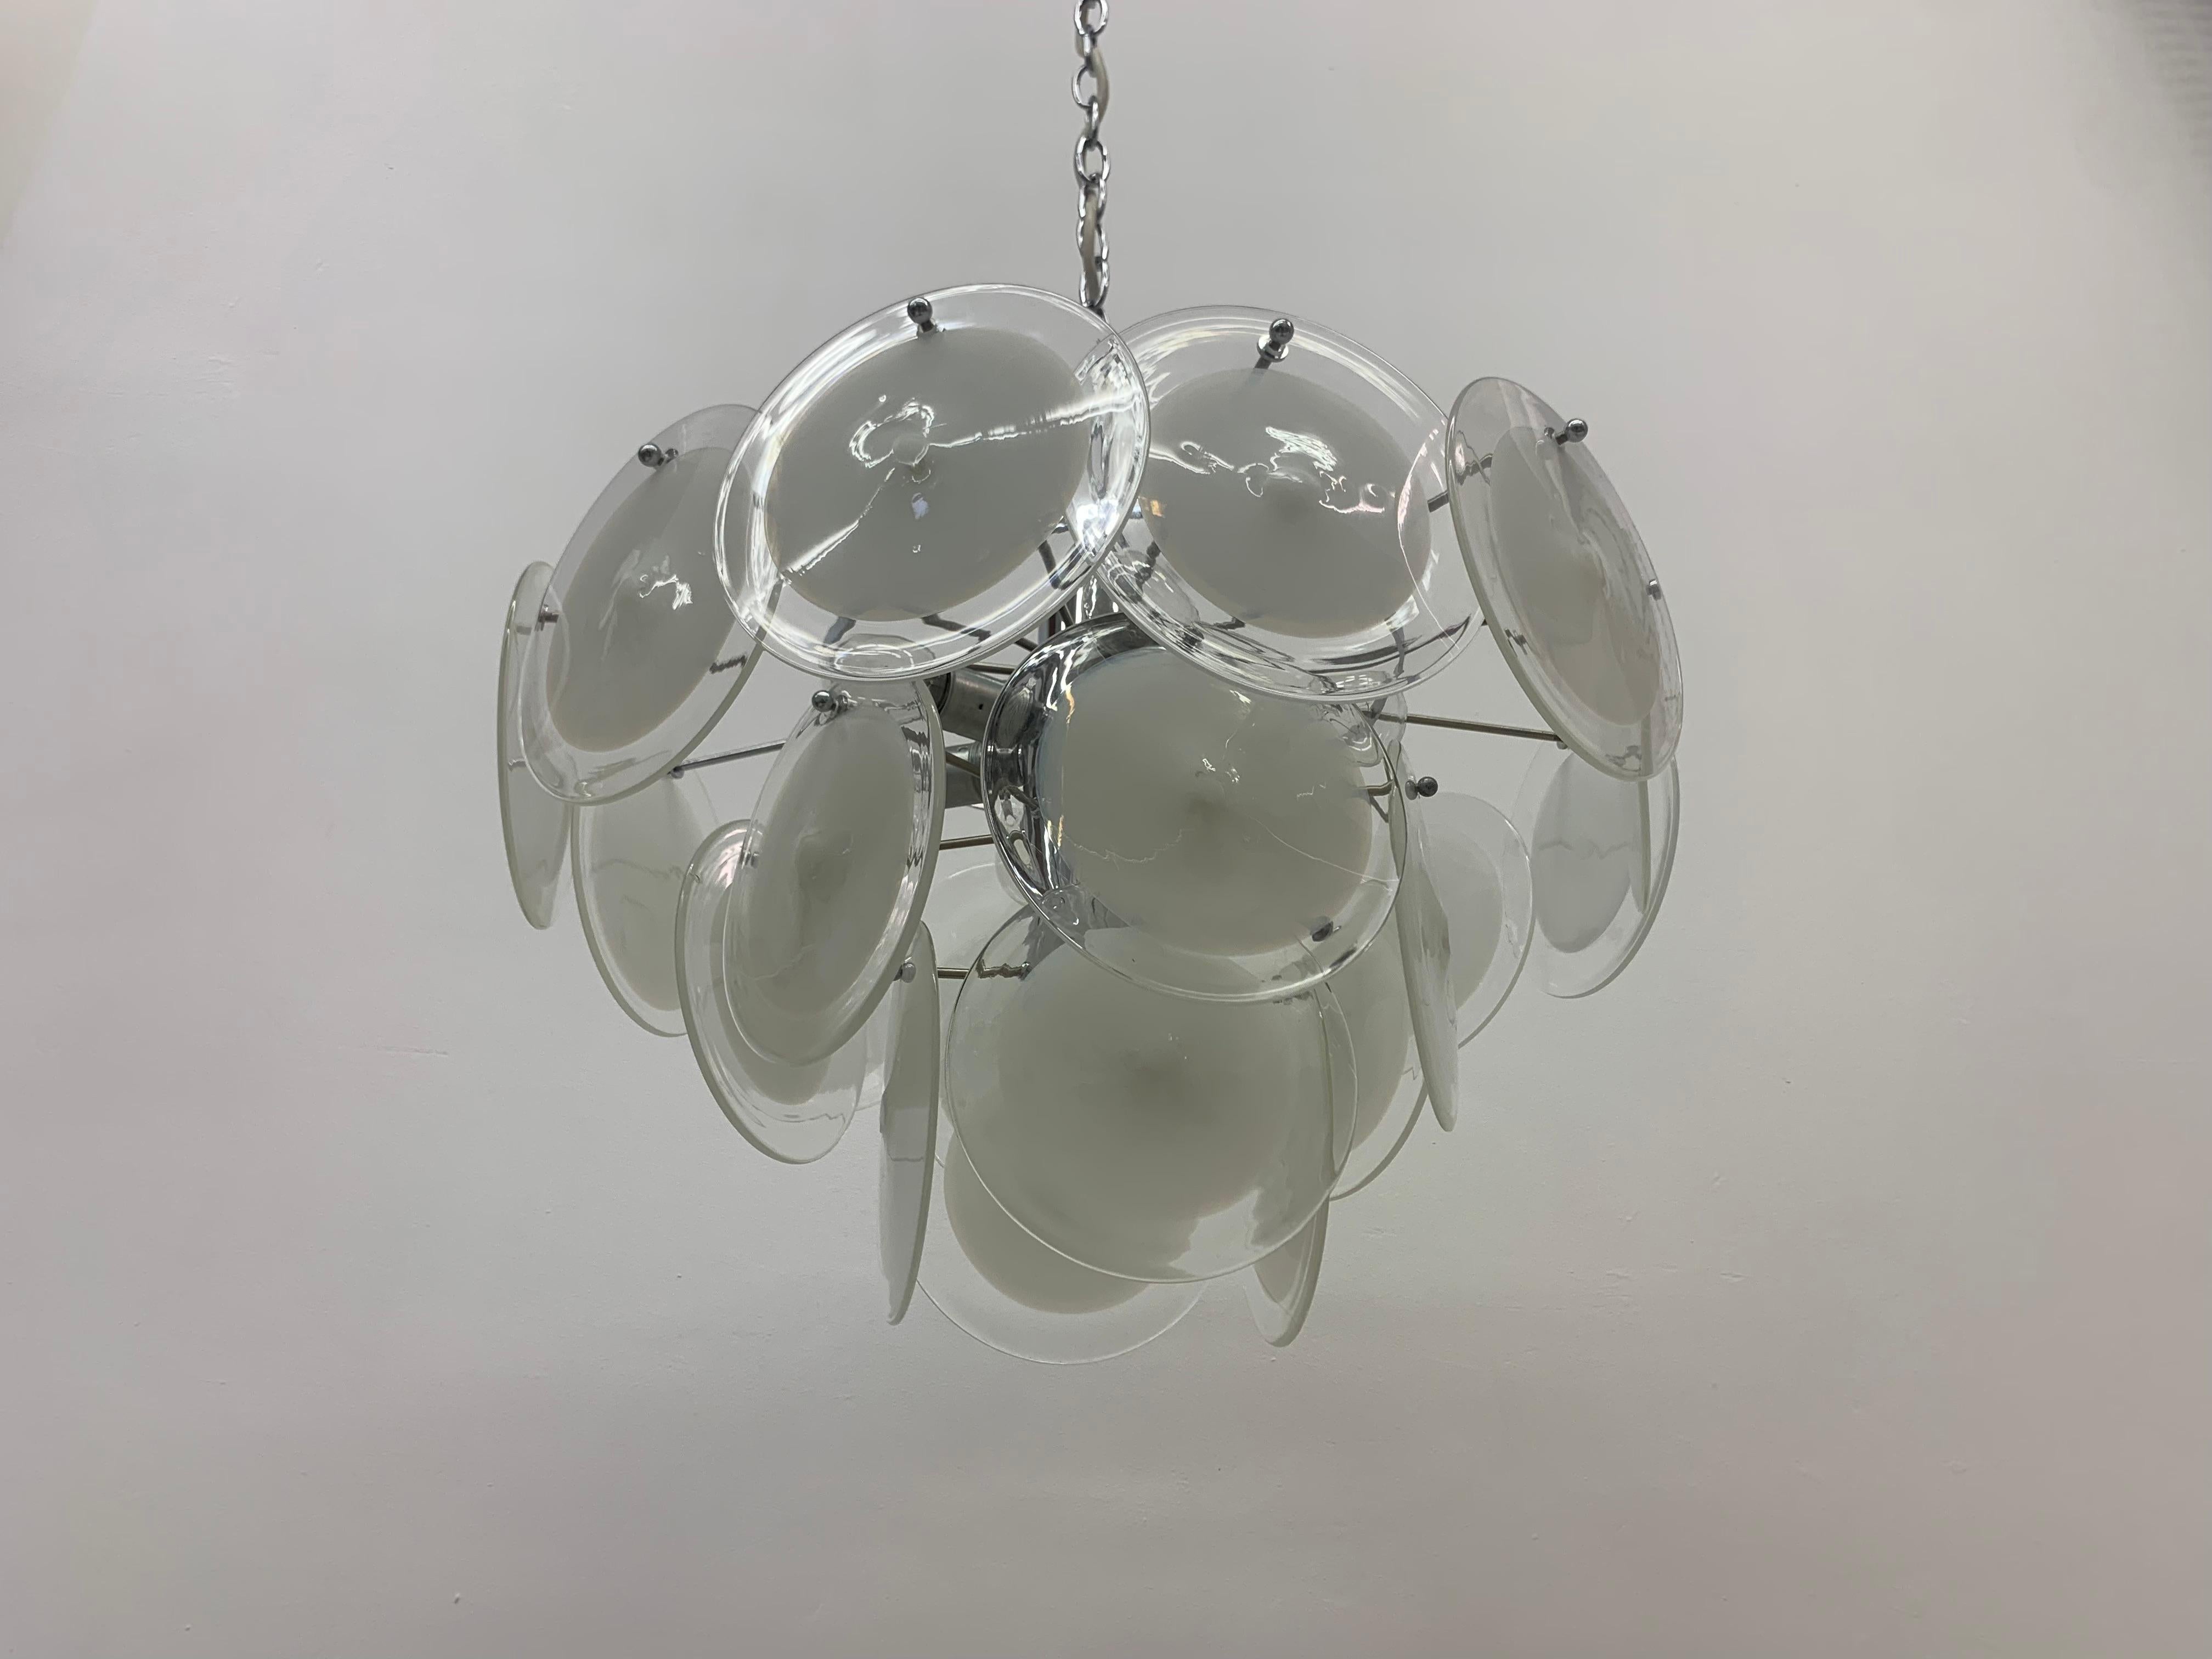 Italian Disc Chandelier by Vistosi Murano Glass, Italy, 1970s For Sale 2